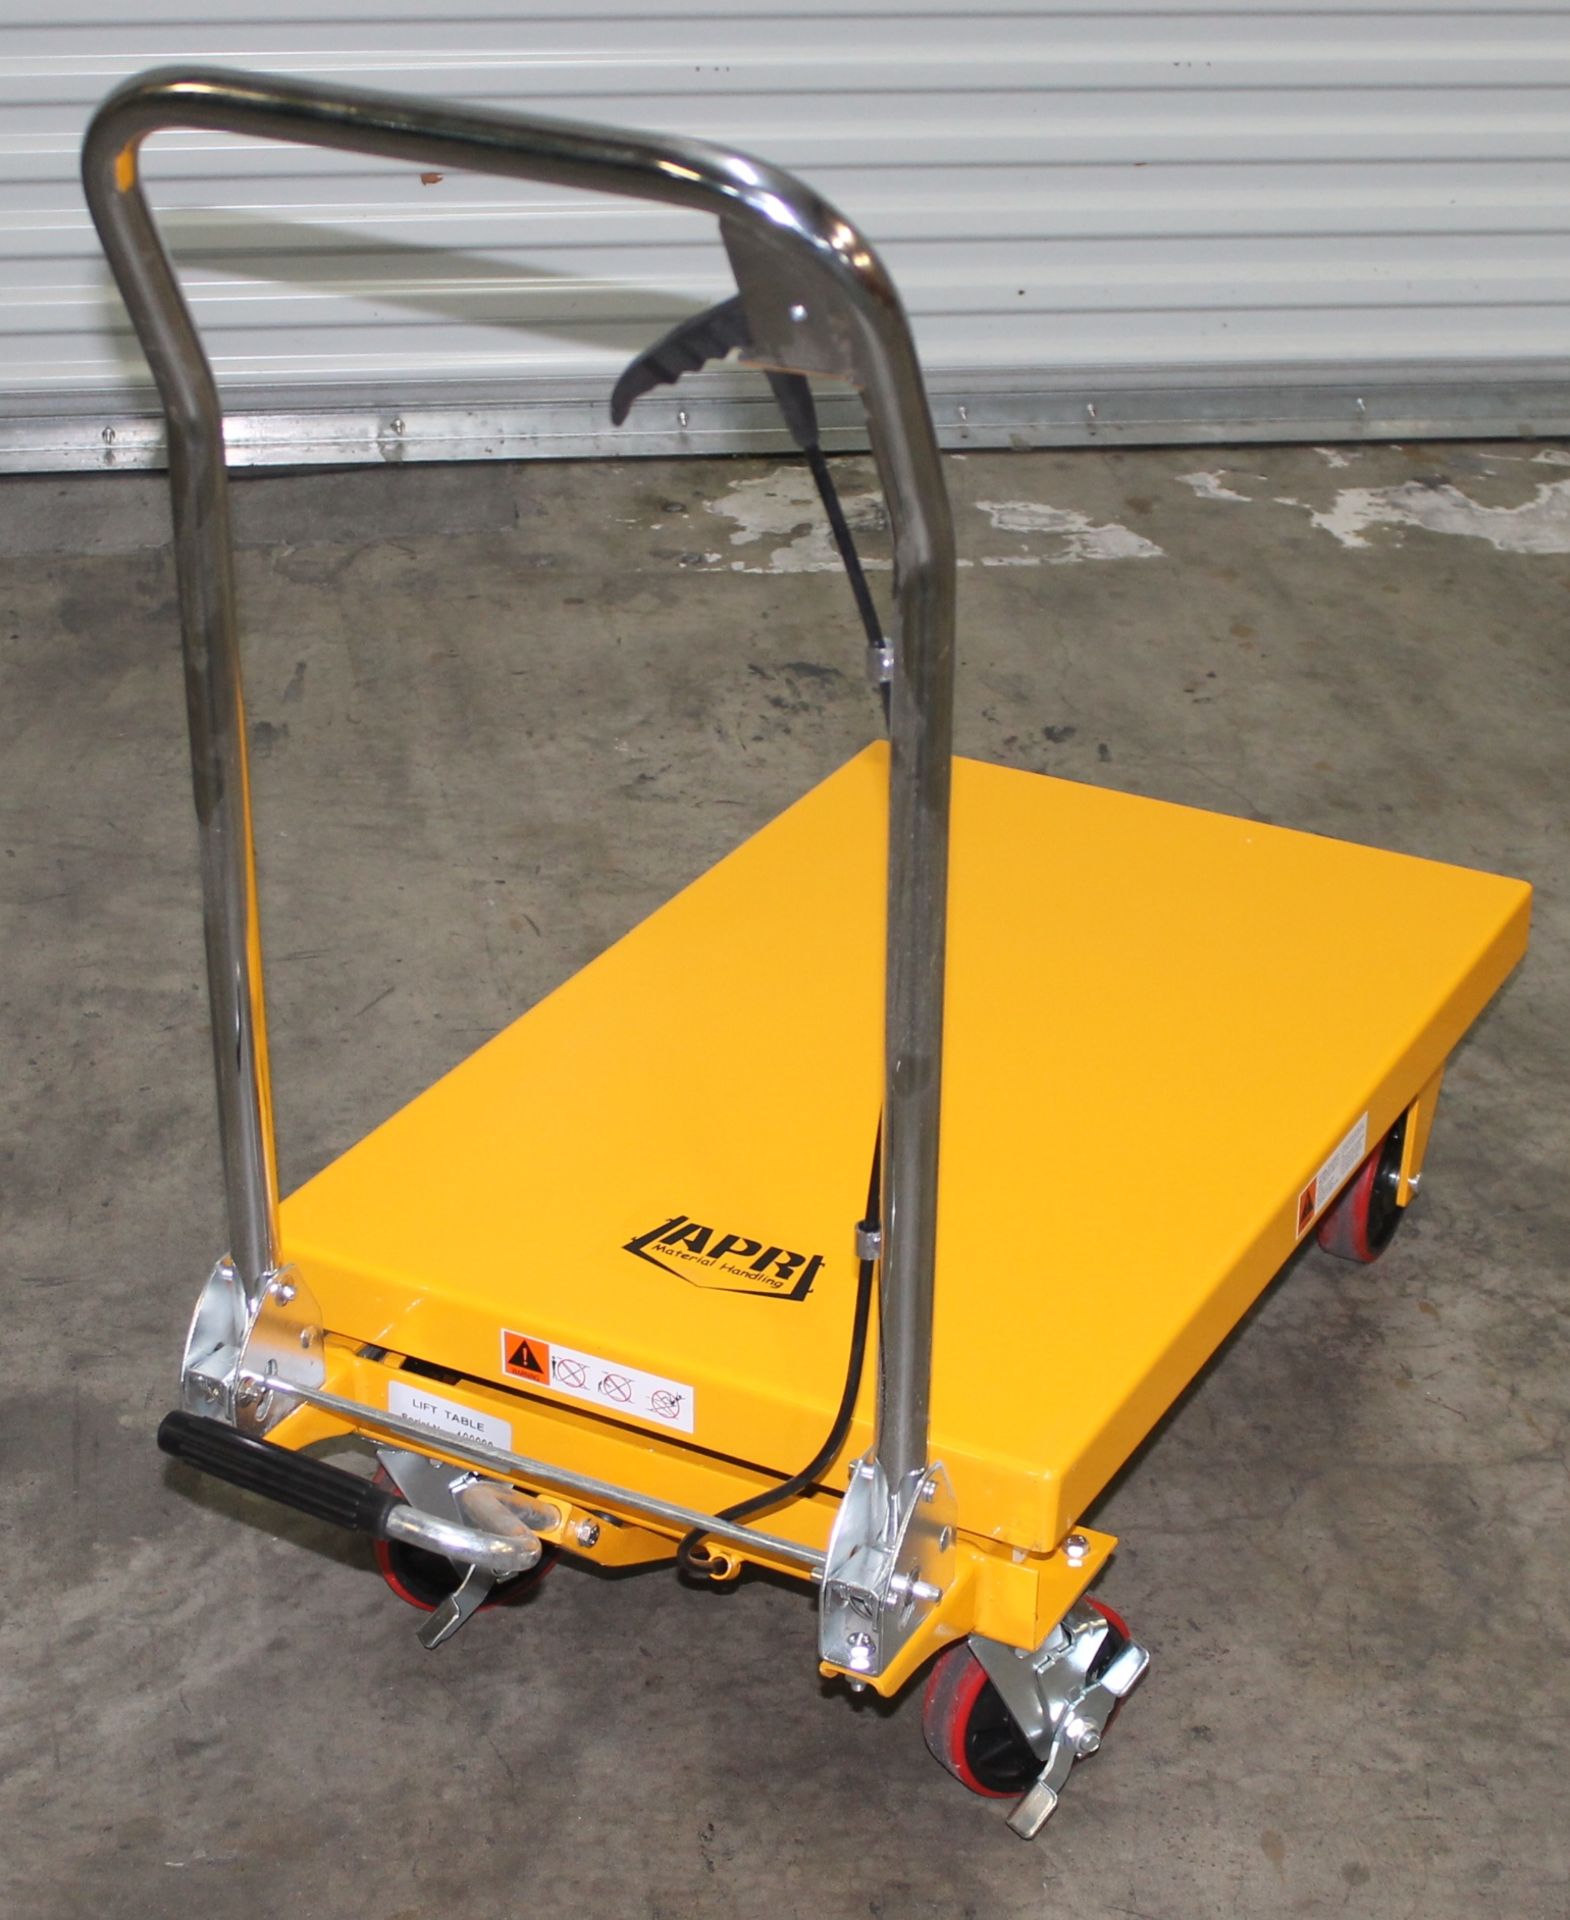 1102 LBS CAP. ROLLING SCISSOR LIFT TABLE, CAPACITY: 1102 LBS., MAX HEIGHT: 22", TABLE SIZE: 33.66" - Image 5 of 7